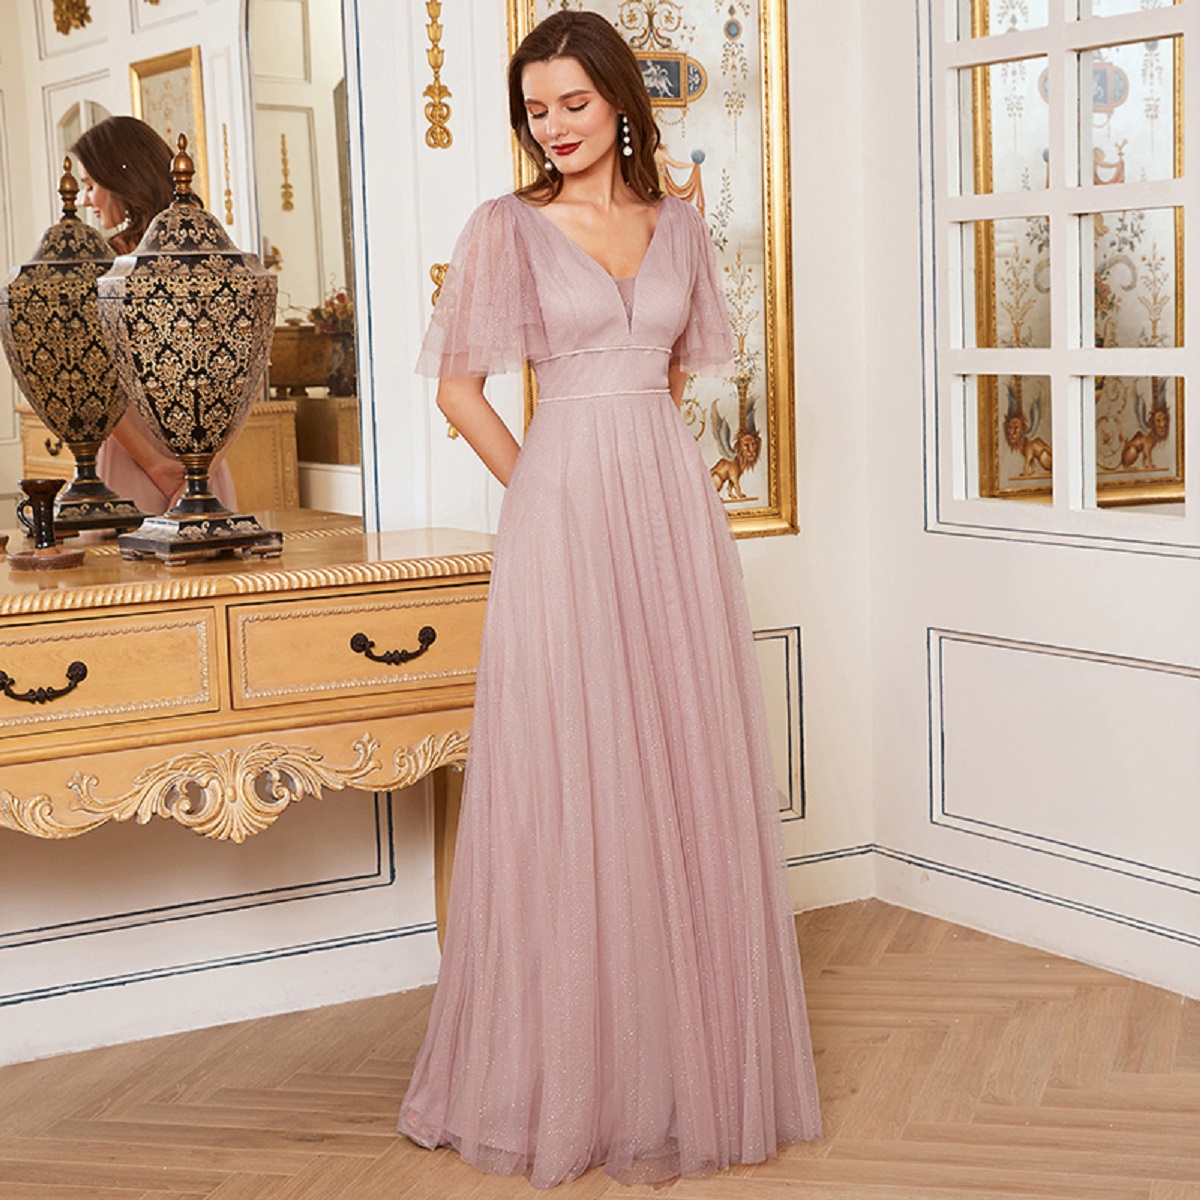 The Ultimate Guide to Choosing Bridesmaid Dress